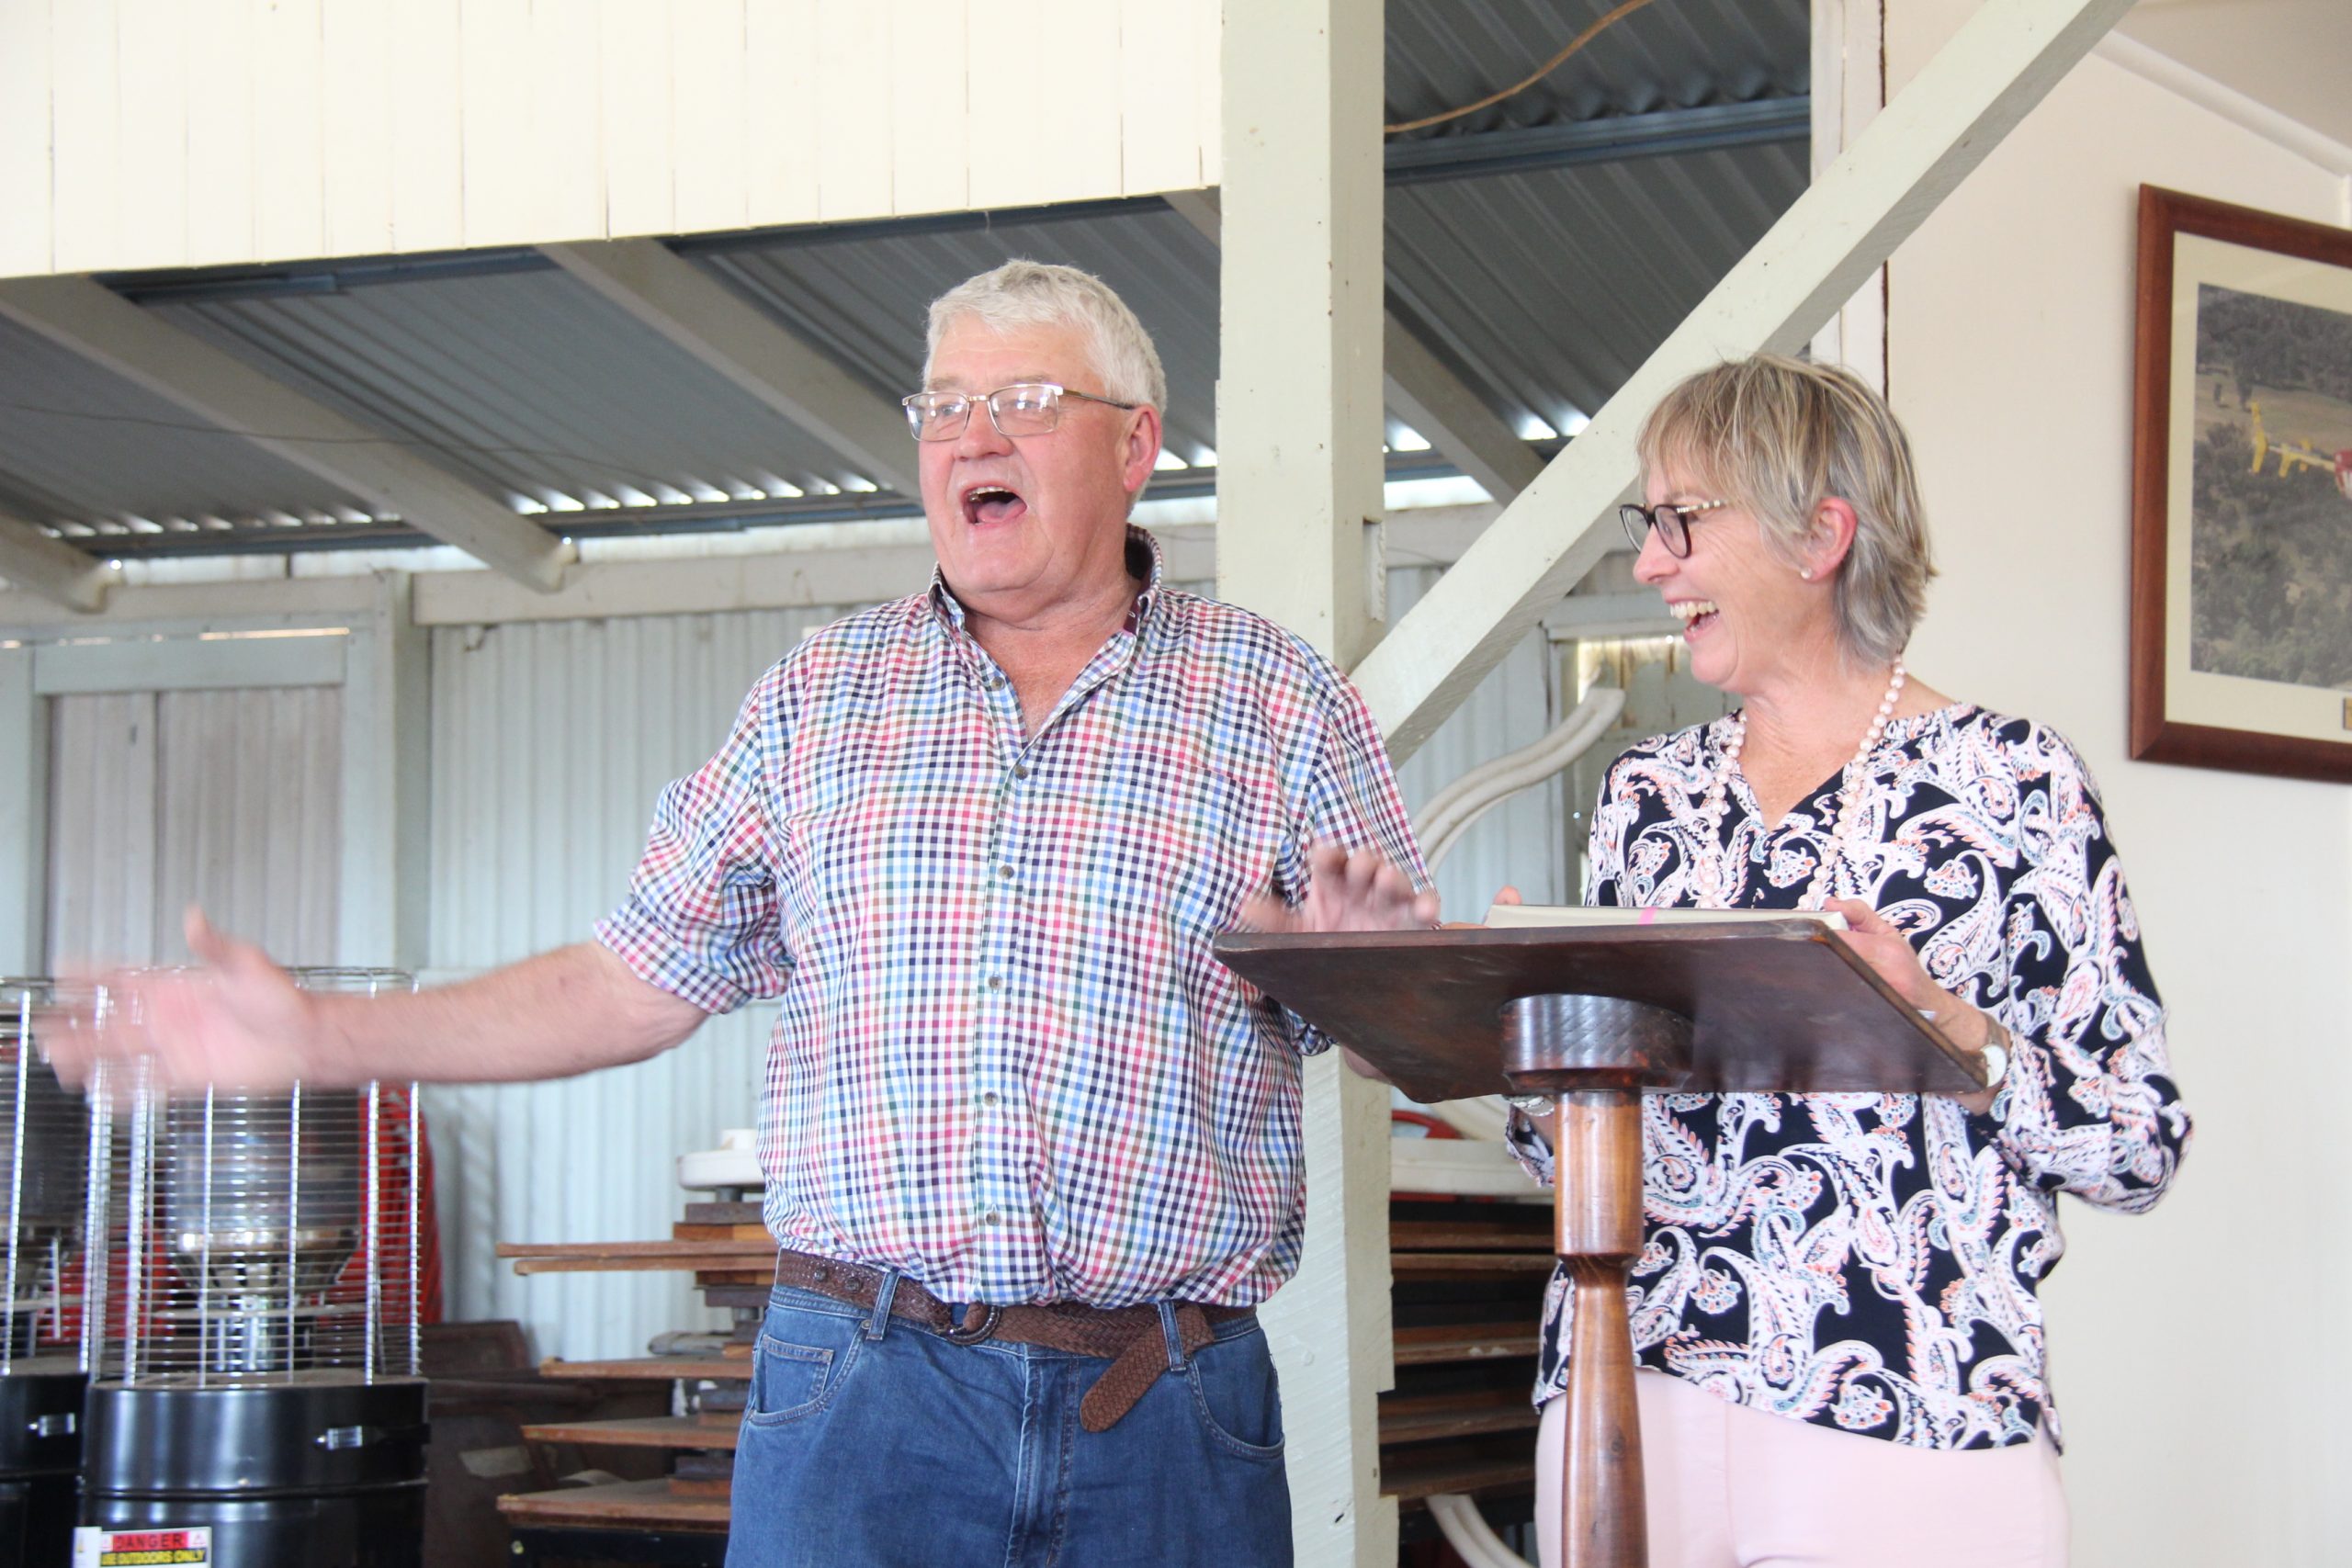 Murray and Nanette Watson gave an entertaining speech about their new life in town and thanked everyone for coming to their farewell lunch.